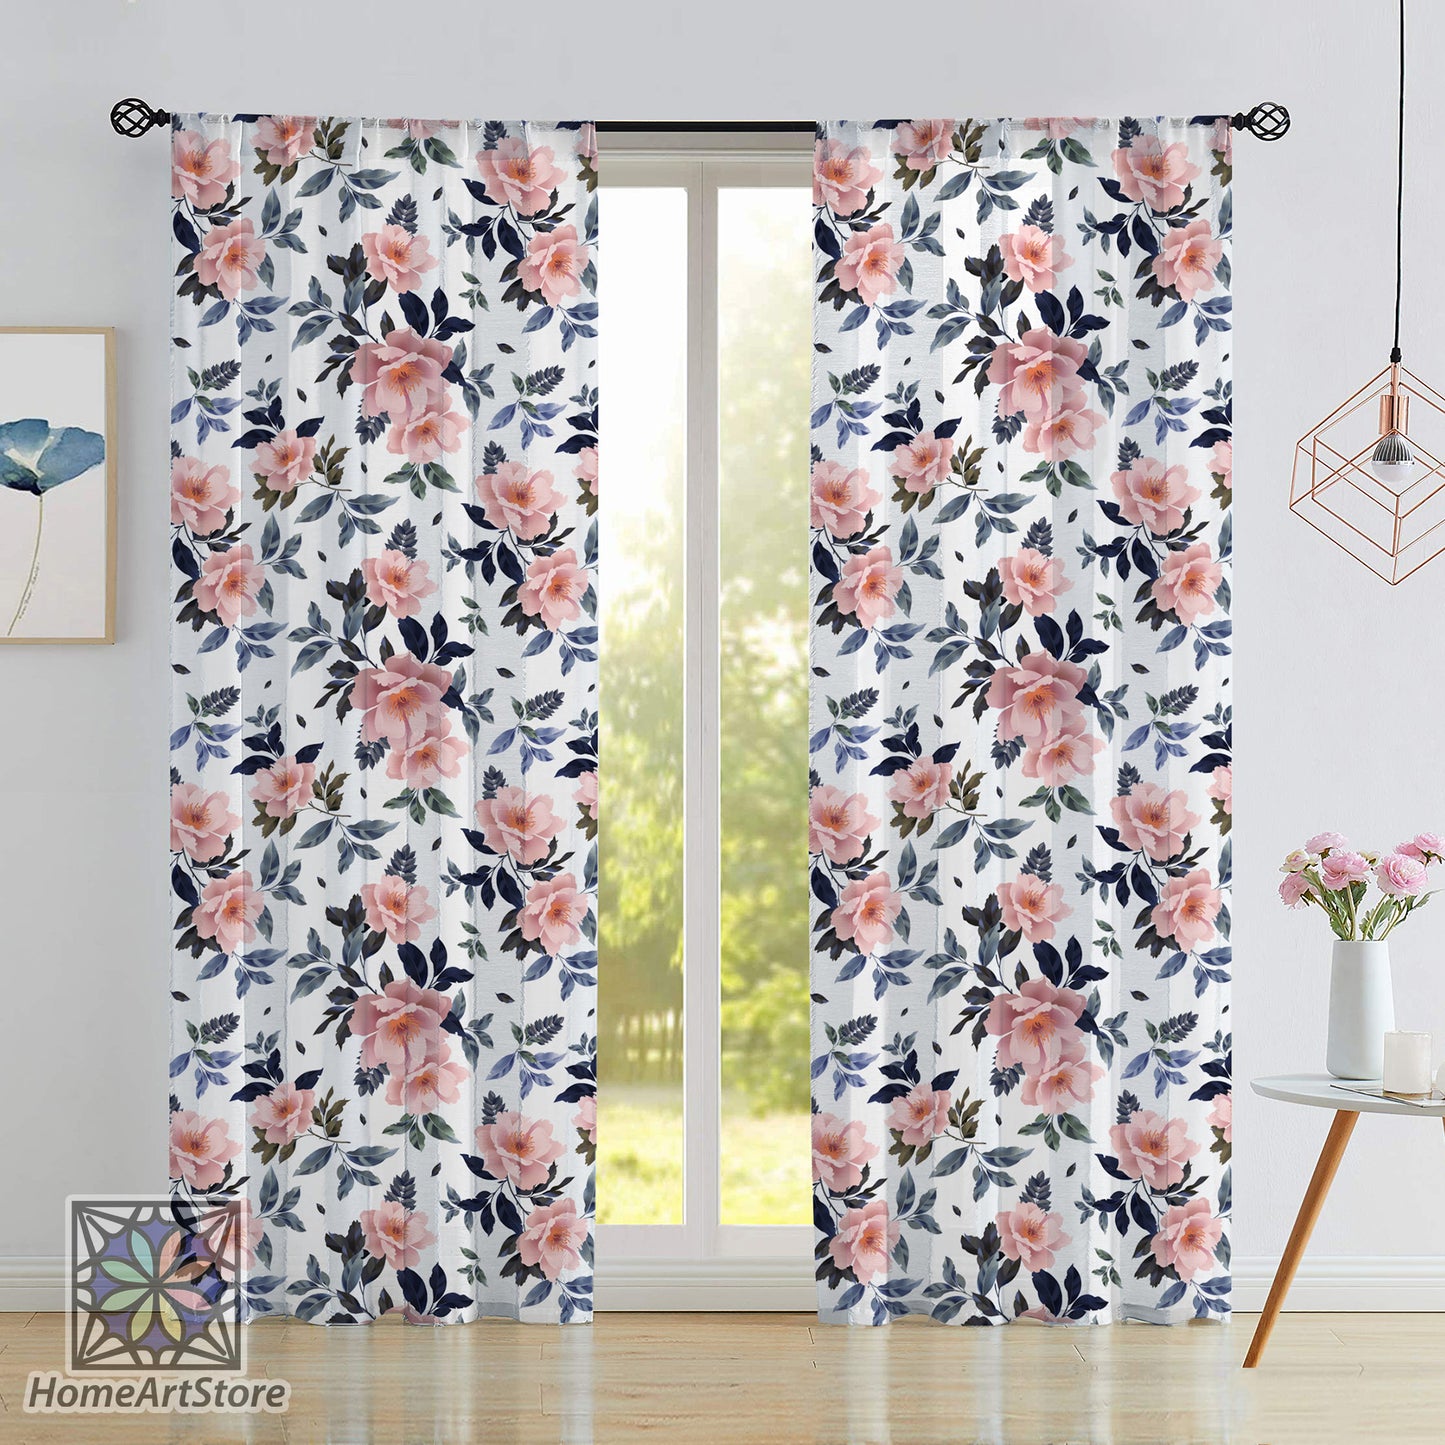 Pink Floral Pattern Curtain, Botanical Flower Curtain, Summer Home Decor, Living Room Curtain